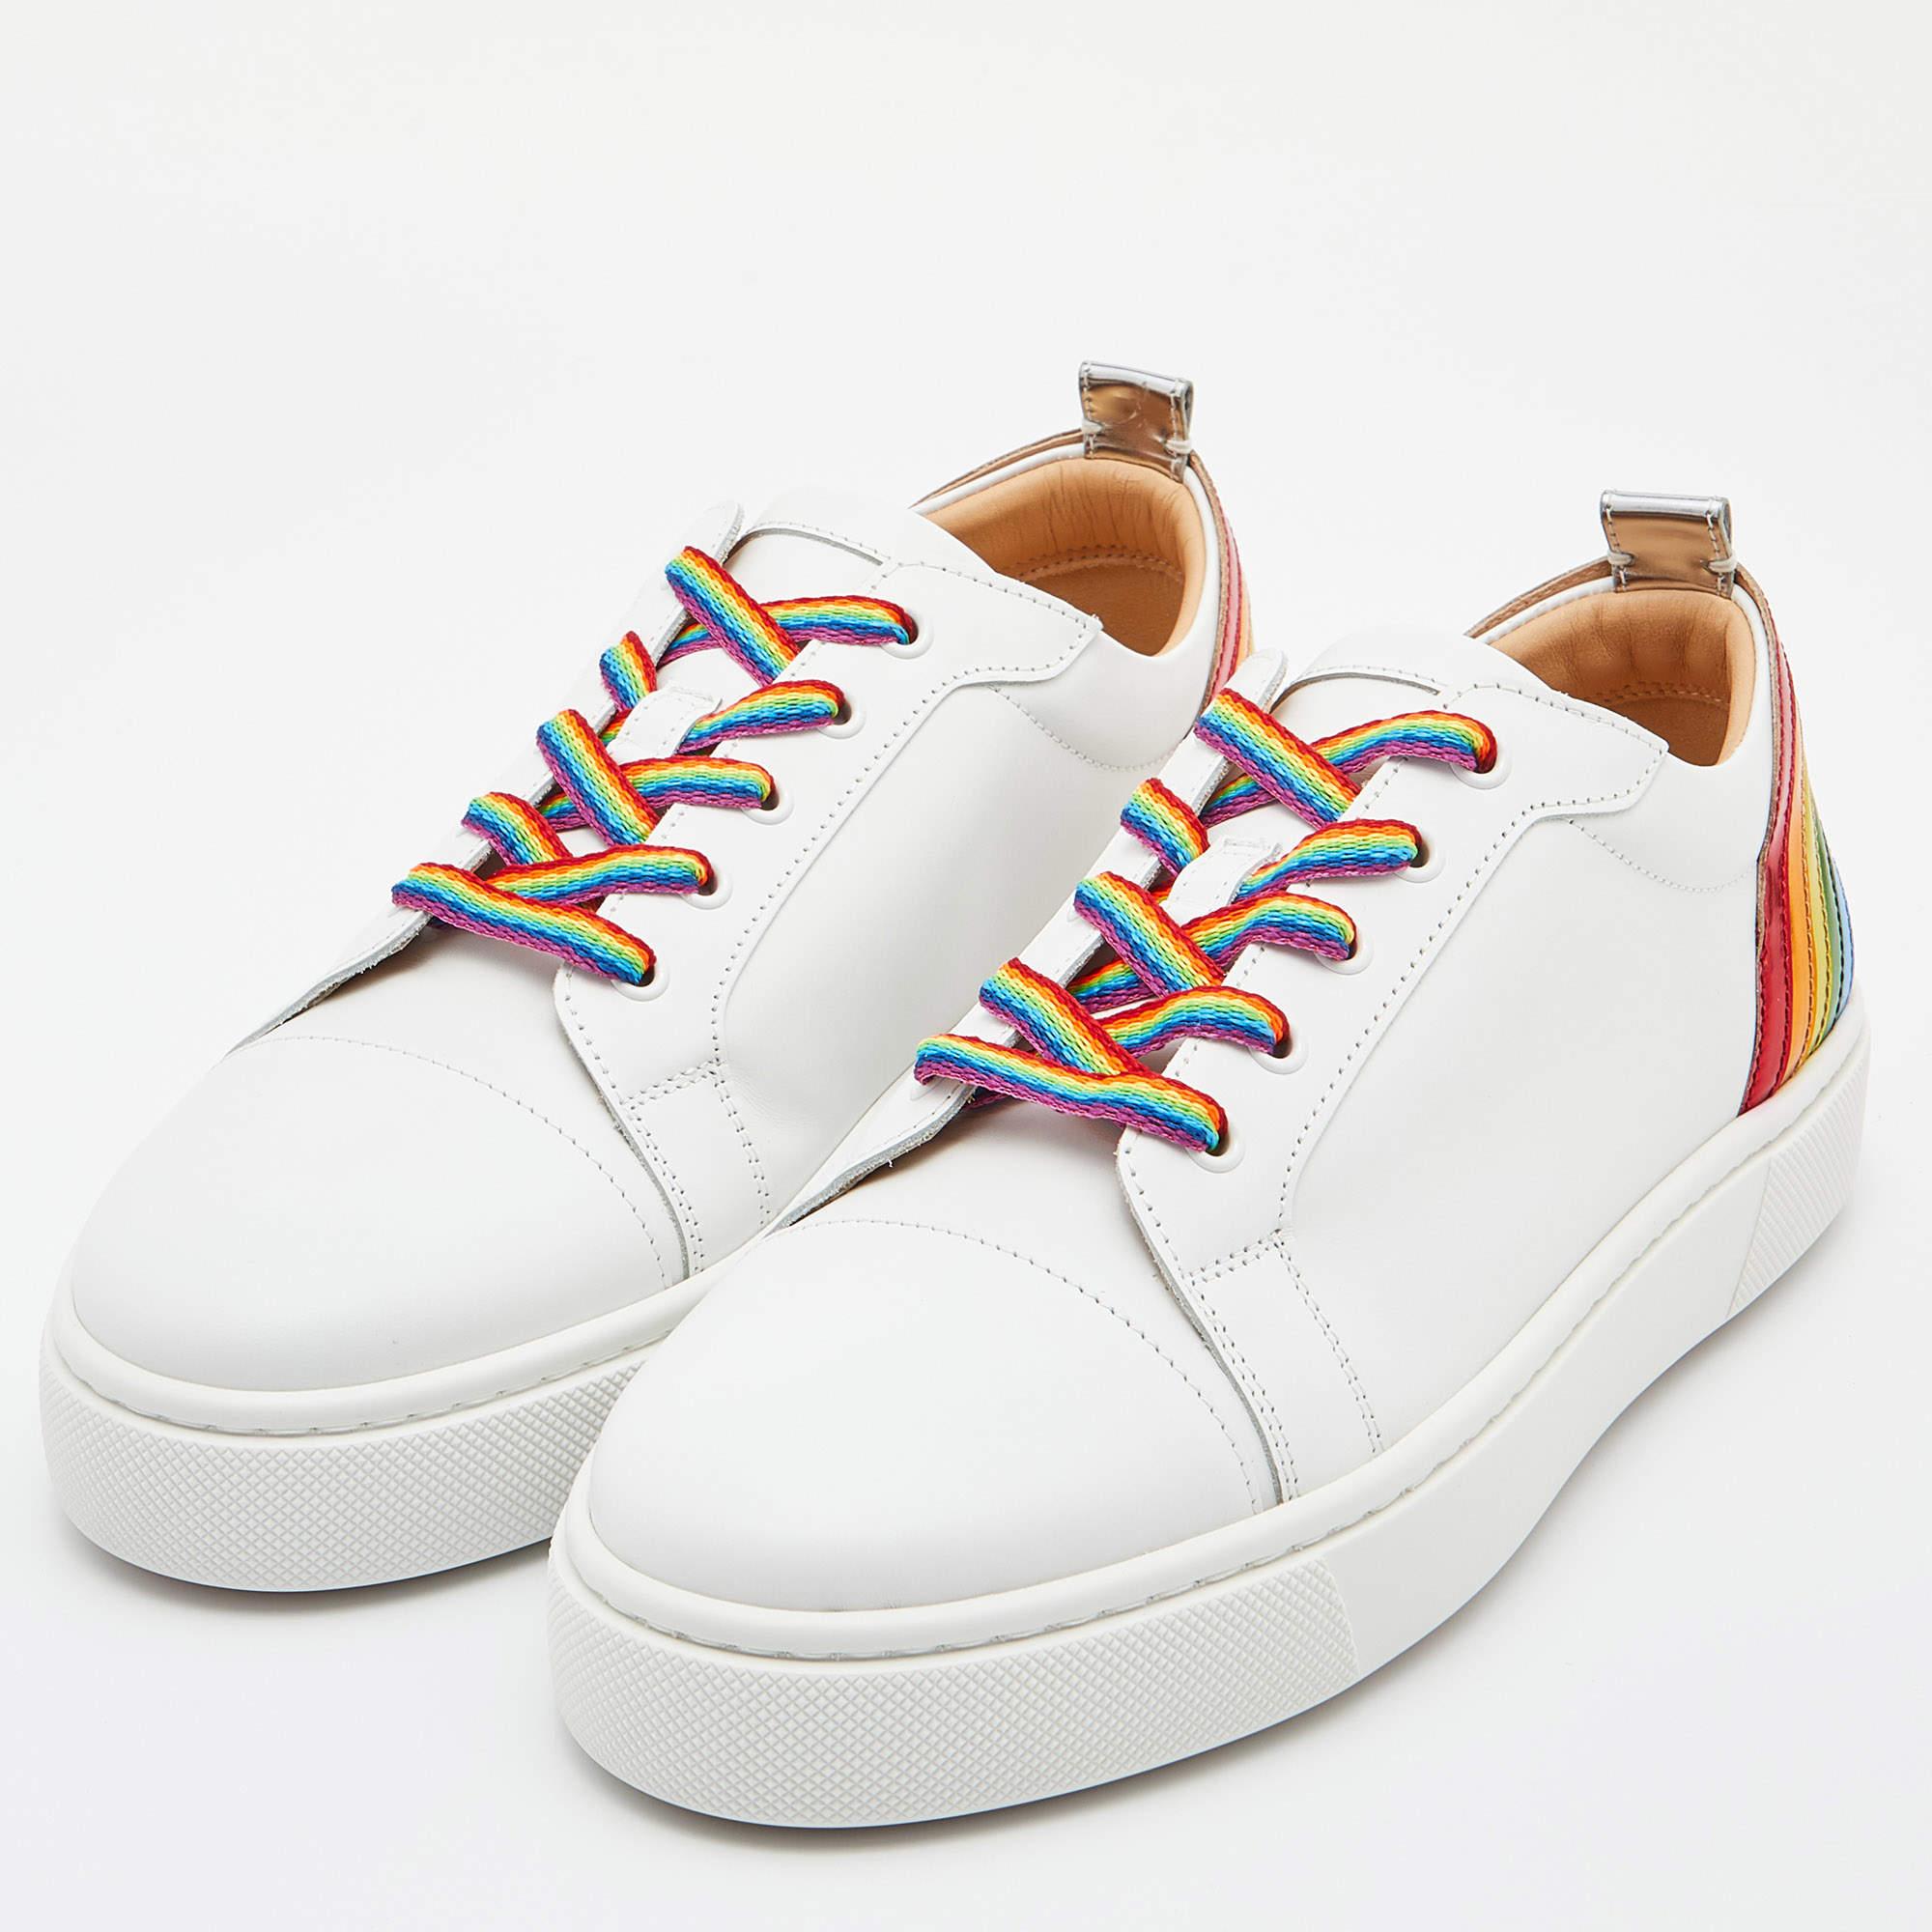 Christian Louboutin White Leather Arkenspeed Rainbow Sneakers Size 40.5 5